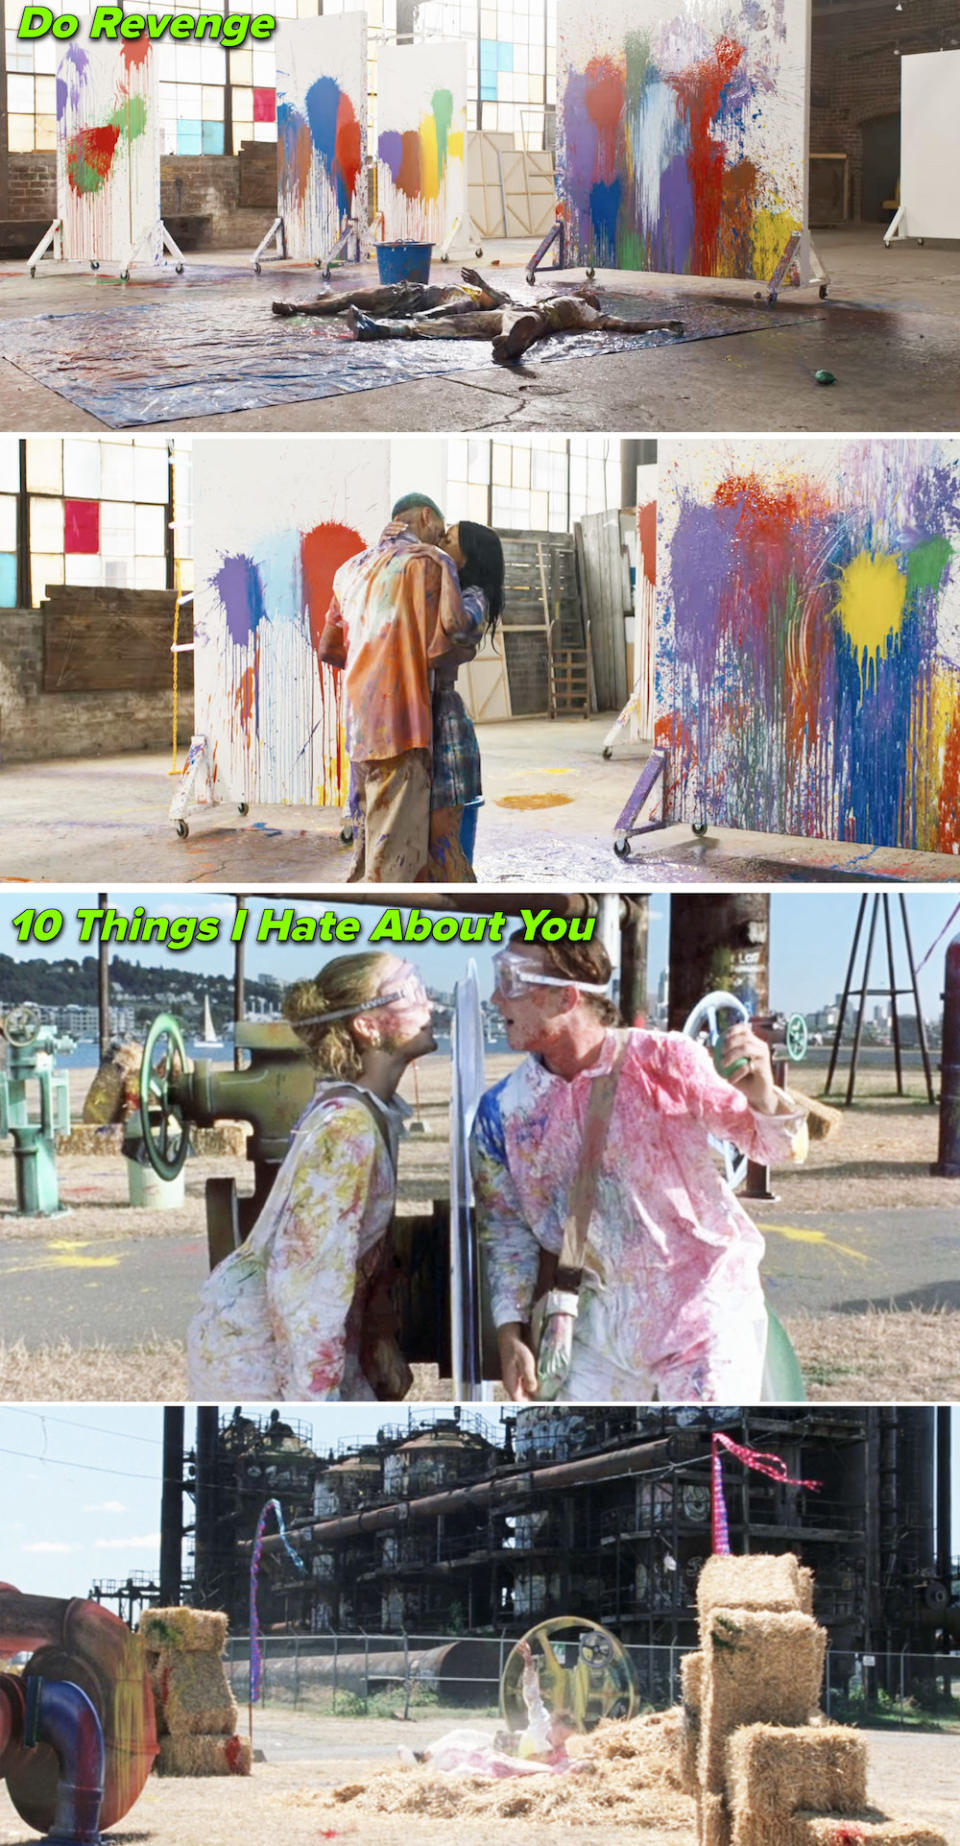 Paint ball scene in "Do Revenge" vs. "10 Things I Hate About You"